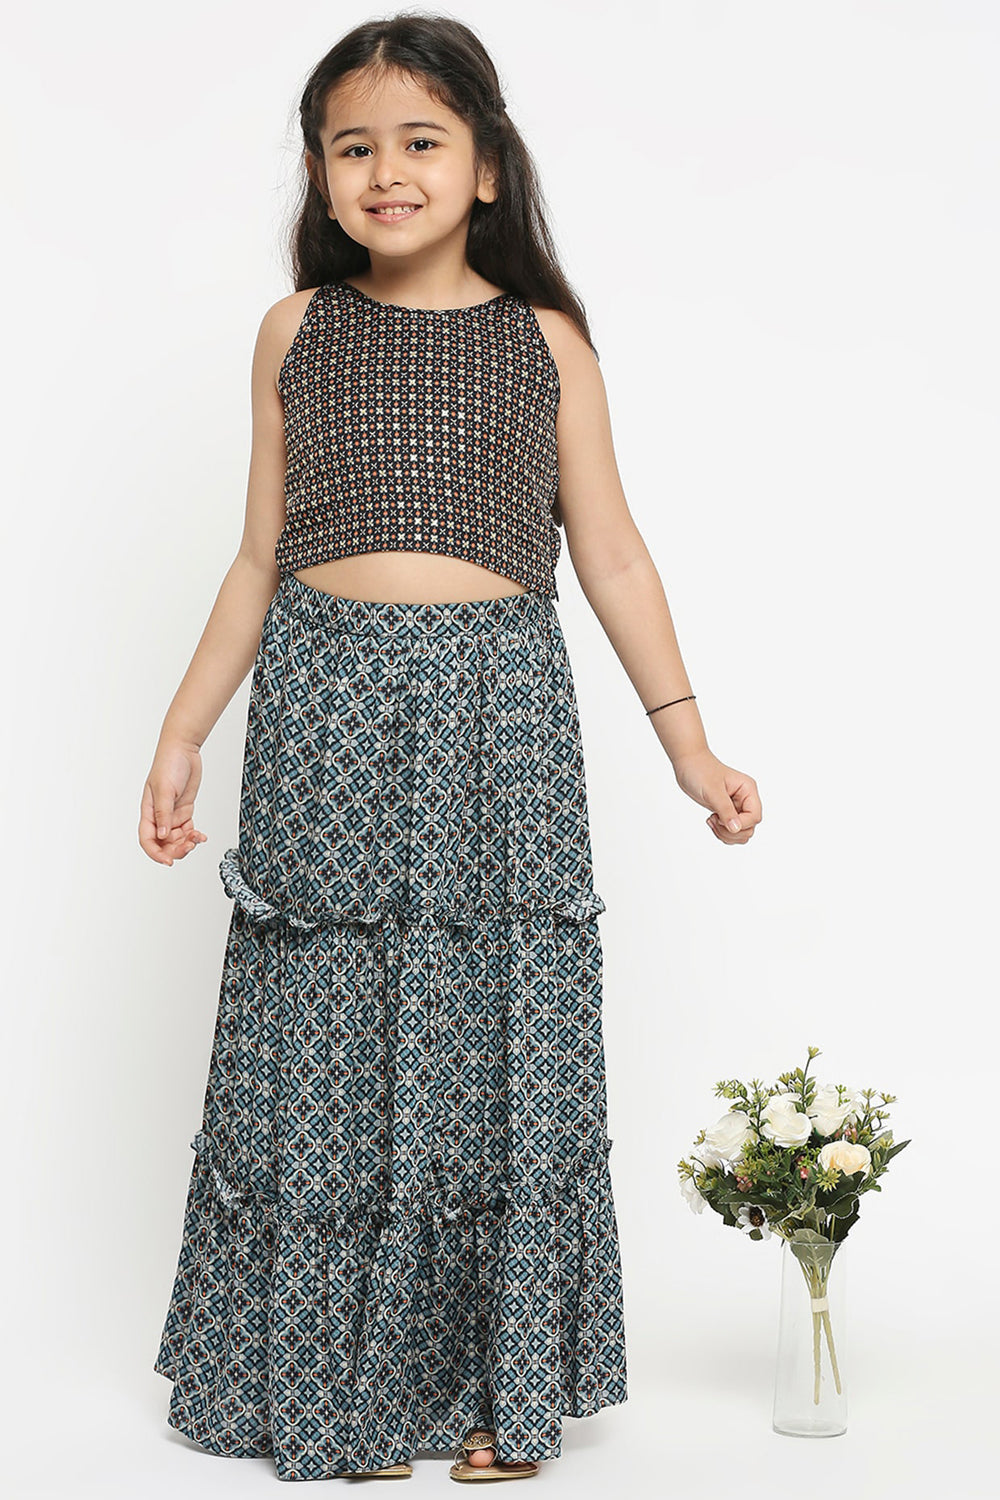 Geomtric Printed Tiered Skirt Paired With A Crop Top